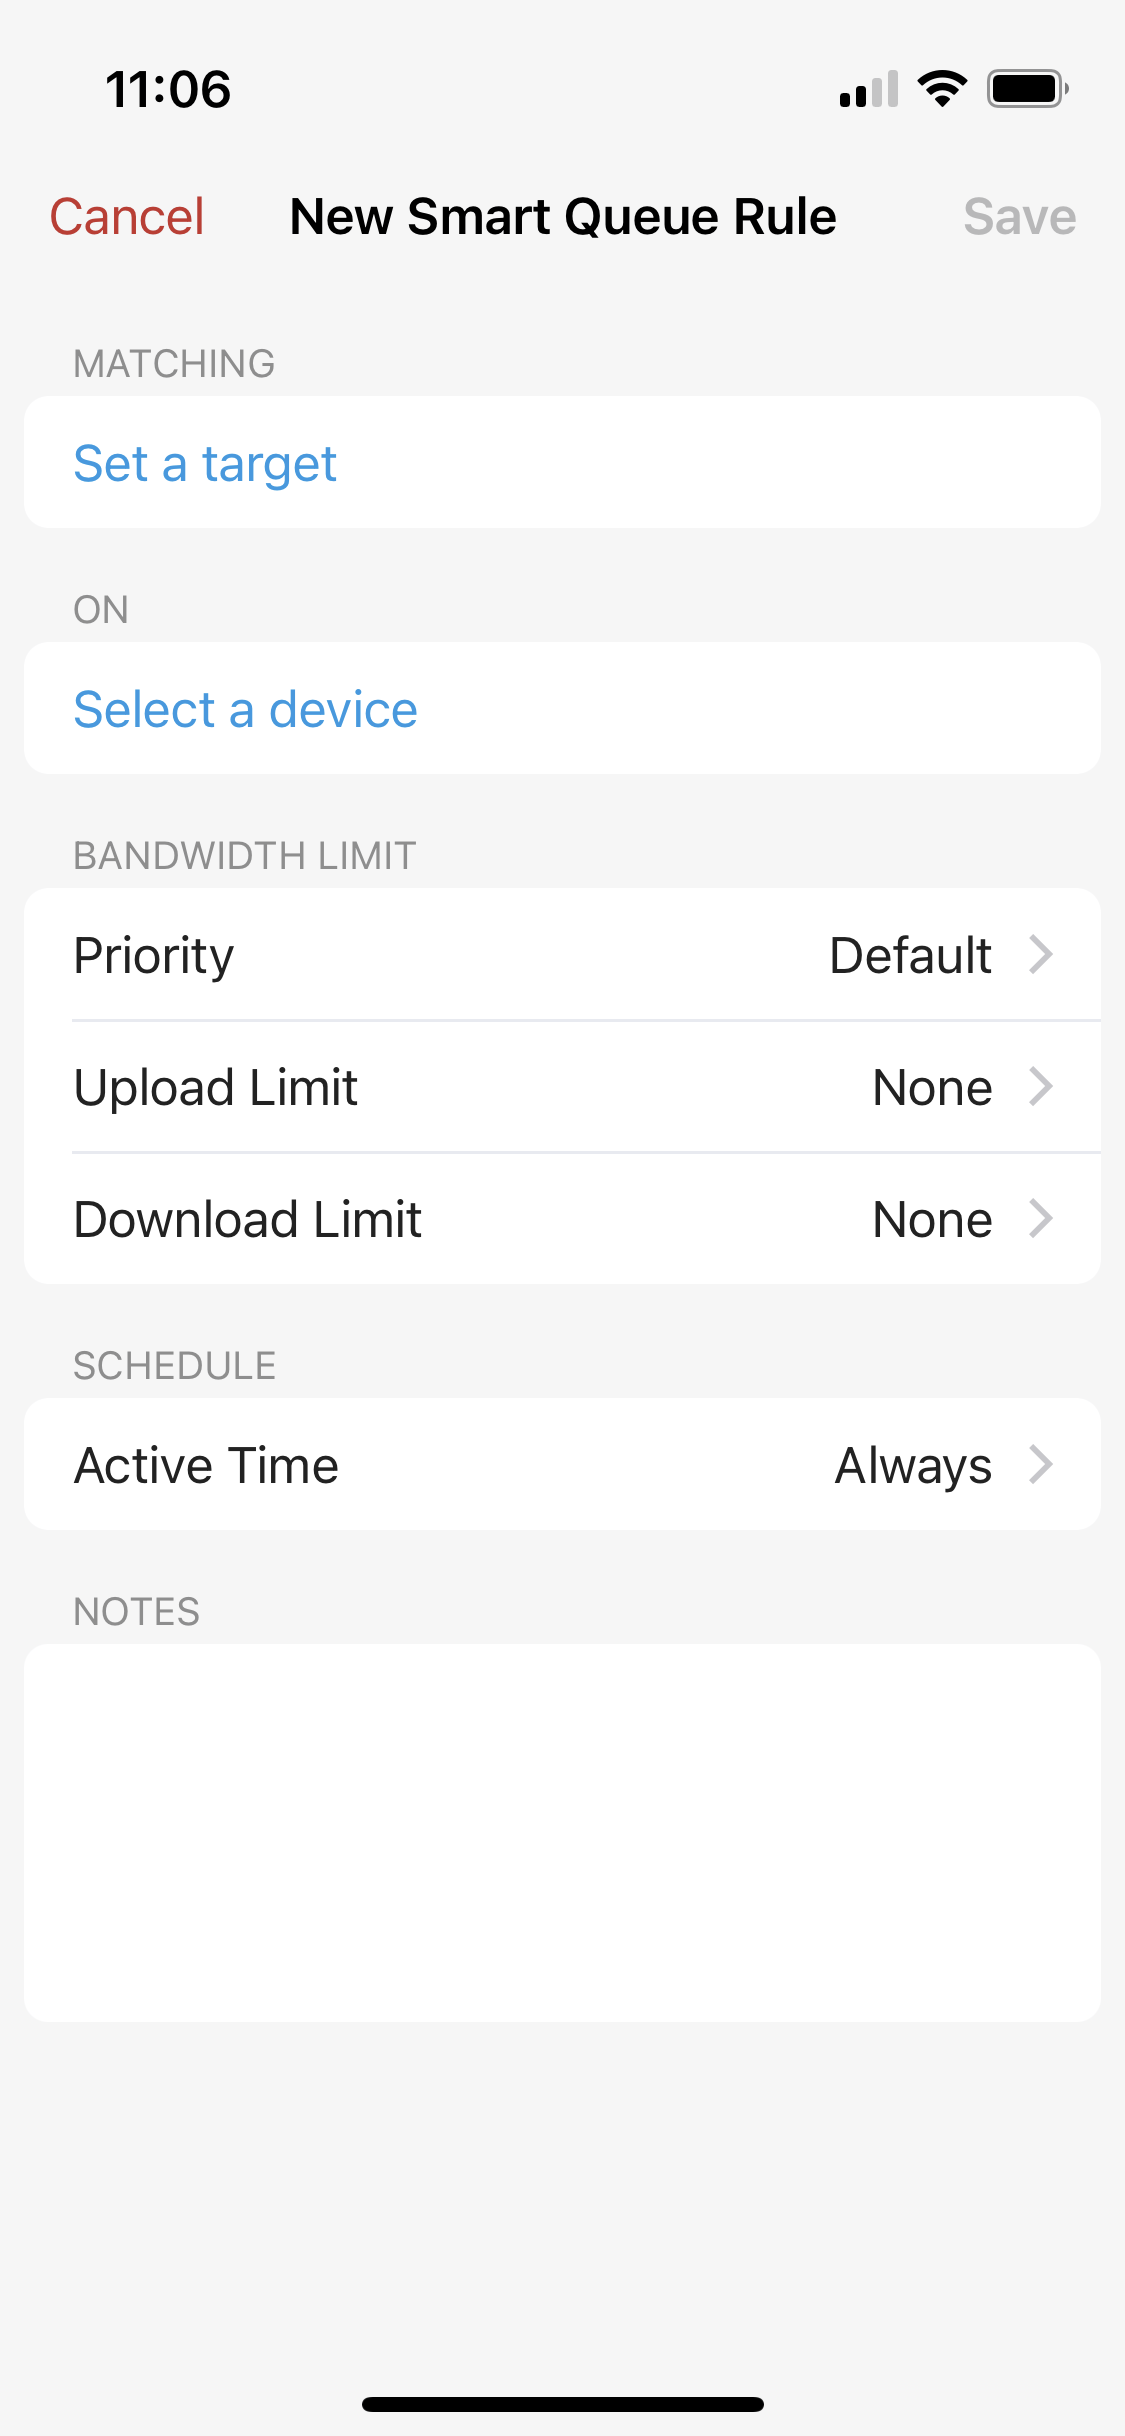 Set up the target, device and other options for your smart queue